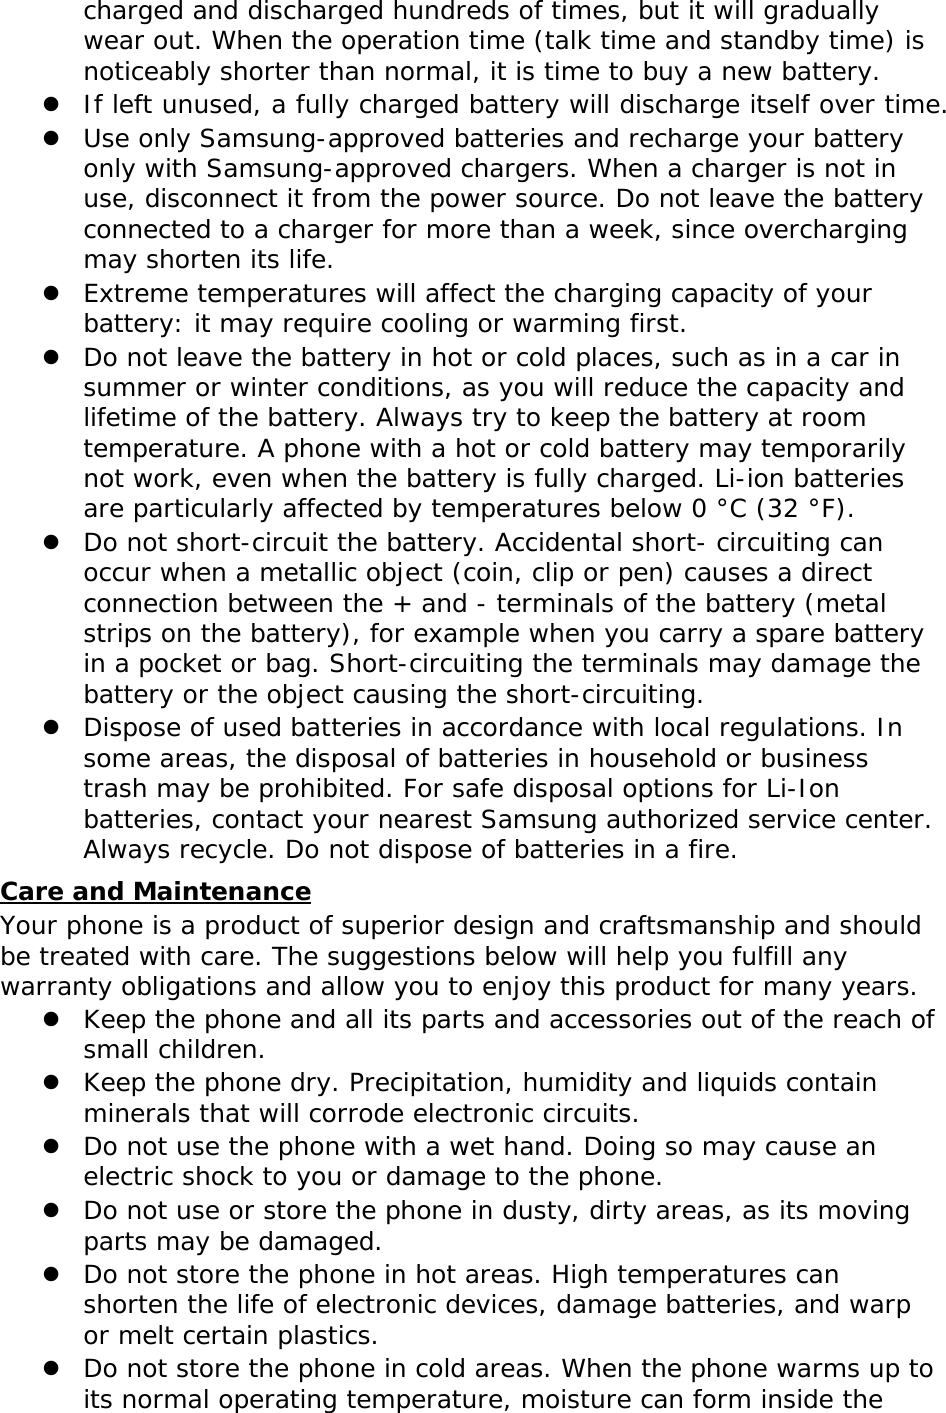 charged and discharged hundreds of times, but it will gradually wear out. When the operation time (talk time and standby time) is noticeably shorter than normal, it is time to buy a new battery.  If left unused, a fully charged battery will discharge itself over time.  Use only Samsung-approved batteries and recharge your battery only with Samsung-approved chargers. When a charger is not in use, disconnect it from the power source. Do not leave the battery connected to a charger for more than a week, since overcharging may shorten its life.  Extreme temperatures will affect the charging capacity of your battery: it may require cooling or warming first.  Do not leave the battery in hot or cold places, such as in a car in summer or winter conditions, as you will reduce the capacity and lifetime of the battery. Always try to keep the battery at room temperature. A phone with a hot or cold battery may temporarily not work, even when the battery is fully charged. Li-ion batteries are particularly affected by temperatures below 0 °C (32 °F).  Do not short-circuit the battery. Accidental short- circuiting can occur when a metallic object (coin, clip or pen) causes a direct connection between the + and - terminals of the battery (metal strips on the battery), for example when you carry a spare battery in a pocket or bag. Short-circuiting the terminals may damage the battery or the object causing the short-circuiting.  Dispose of used batteries in accordance with local regulations. In some areas, the disposal of batteries in household or business trash may be prohibited. For safe disposal options for Li-Ion batteries, contact your nearest Samsung authorized service center. Always recycle. Do not dispose of batteries in a fire. Your phone is a product of superior design and craftsmanship and should be treated with care. The suggestions below will help you fulfill any warranty obligations and allow you to enjoy this product for many years. Care and Maintenance  Keep the phone and all its parts and accessories out of the reach of small children.  Keep the phone dry. Precipitation, humidity and liquids contain minerals that will corrode electronic circuits.  Do not use the phone with a wet hand. Doing so may cause an electric shock to you or damage to the phone.  Do not use or store the phone in dusty, dirty areas, as its moving parts may be damaged.  Do not store the phone in hot areas. High temperatures can shorten the life of electronic devices, damage batteries, and warp or melt certain plastics.  Do not store the phone in cold areas. When the phone warms up to its normal operating temperature, moisture can form inside the 